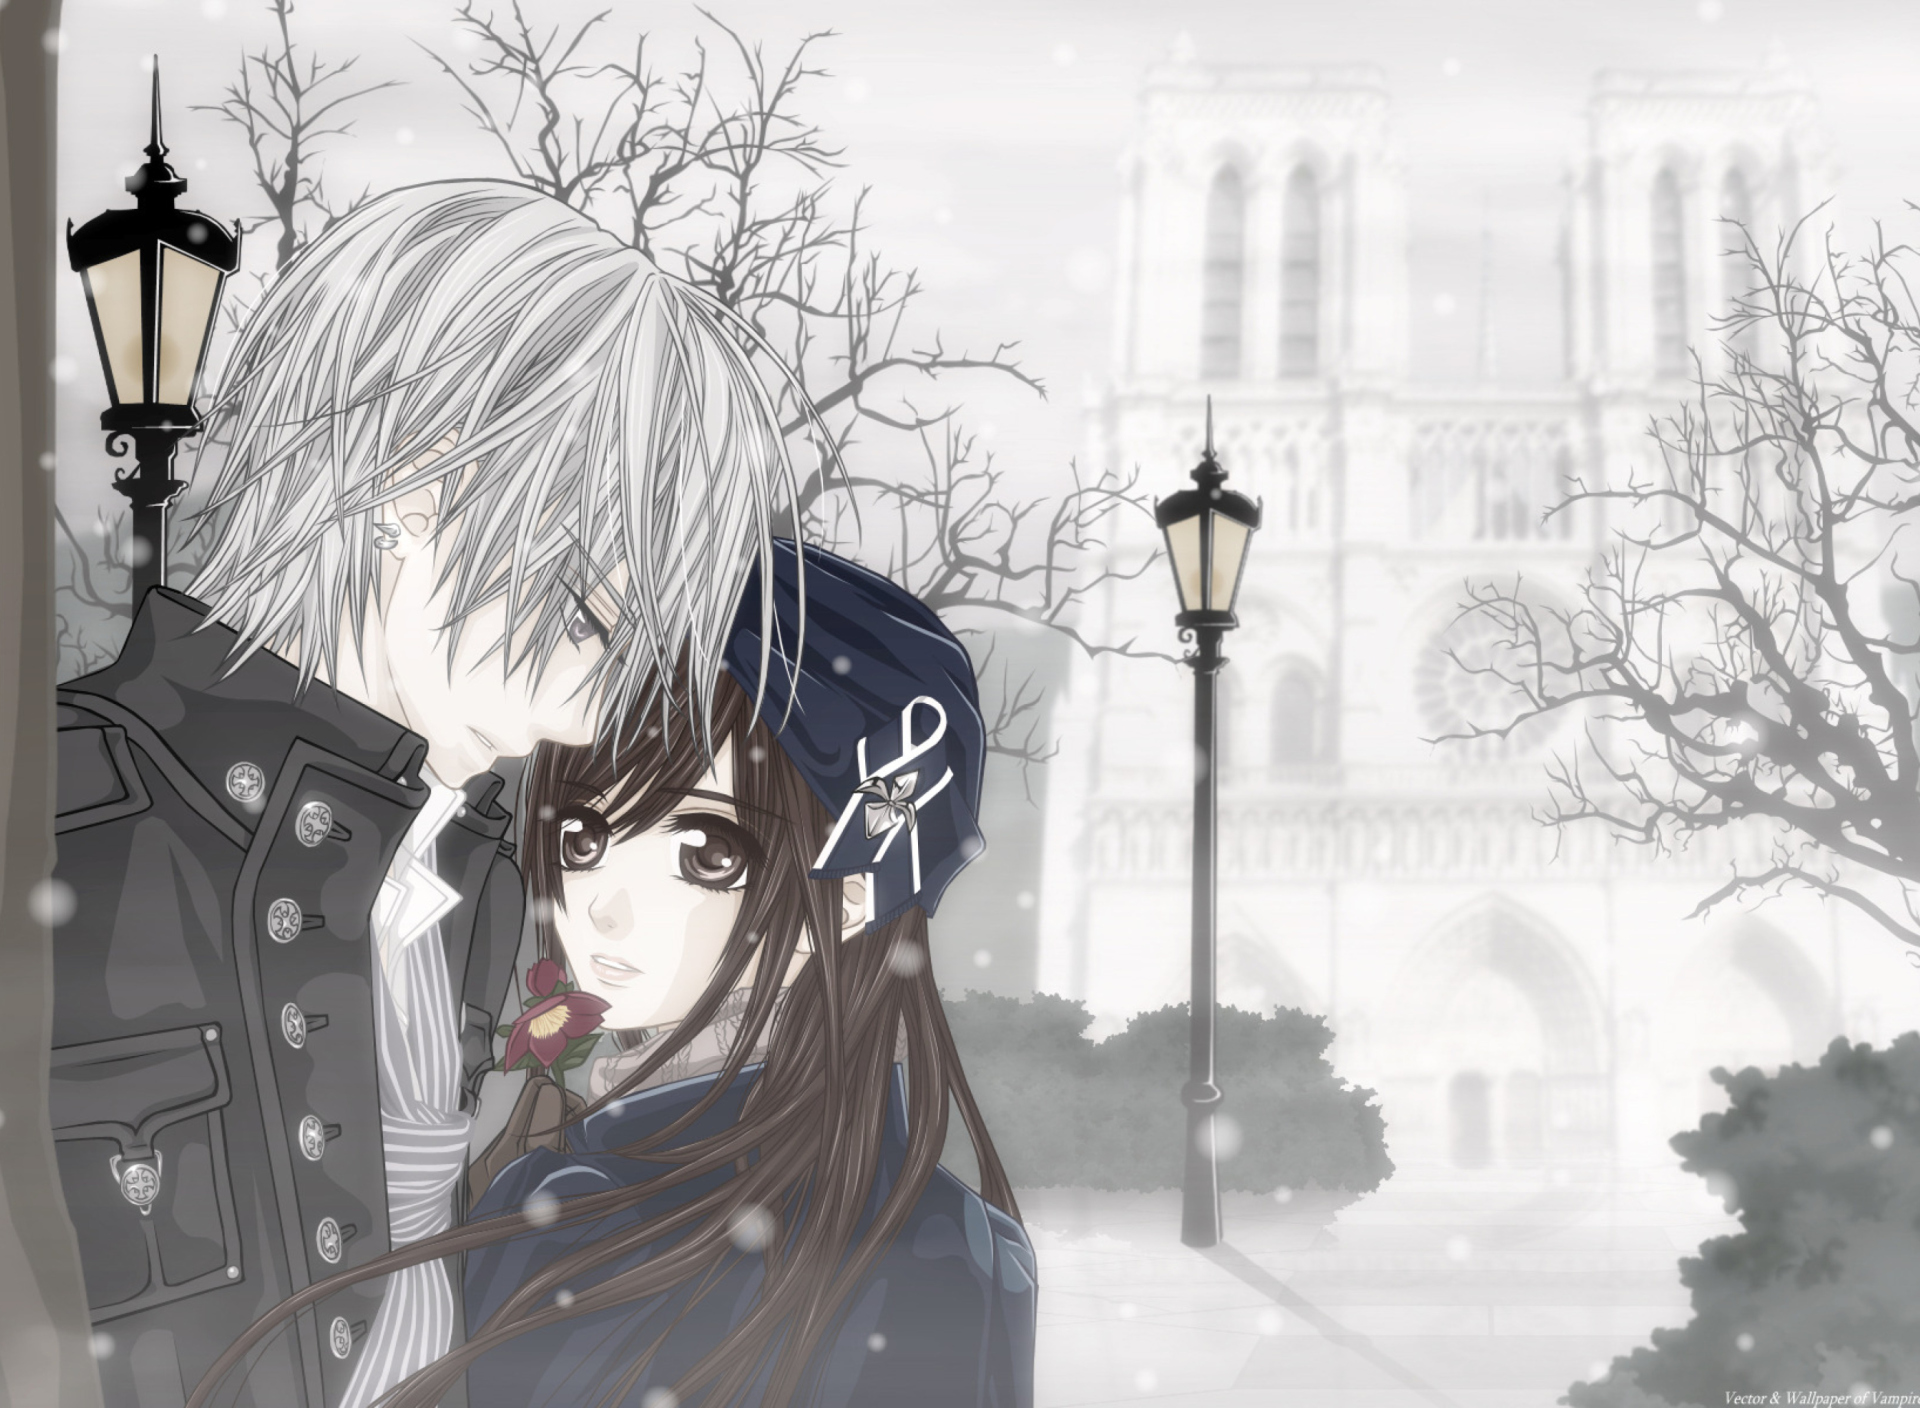 Cute Anime Couple Backgrounds - 1920x1408 Wallpaper 